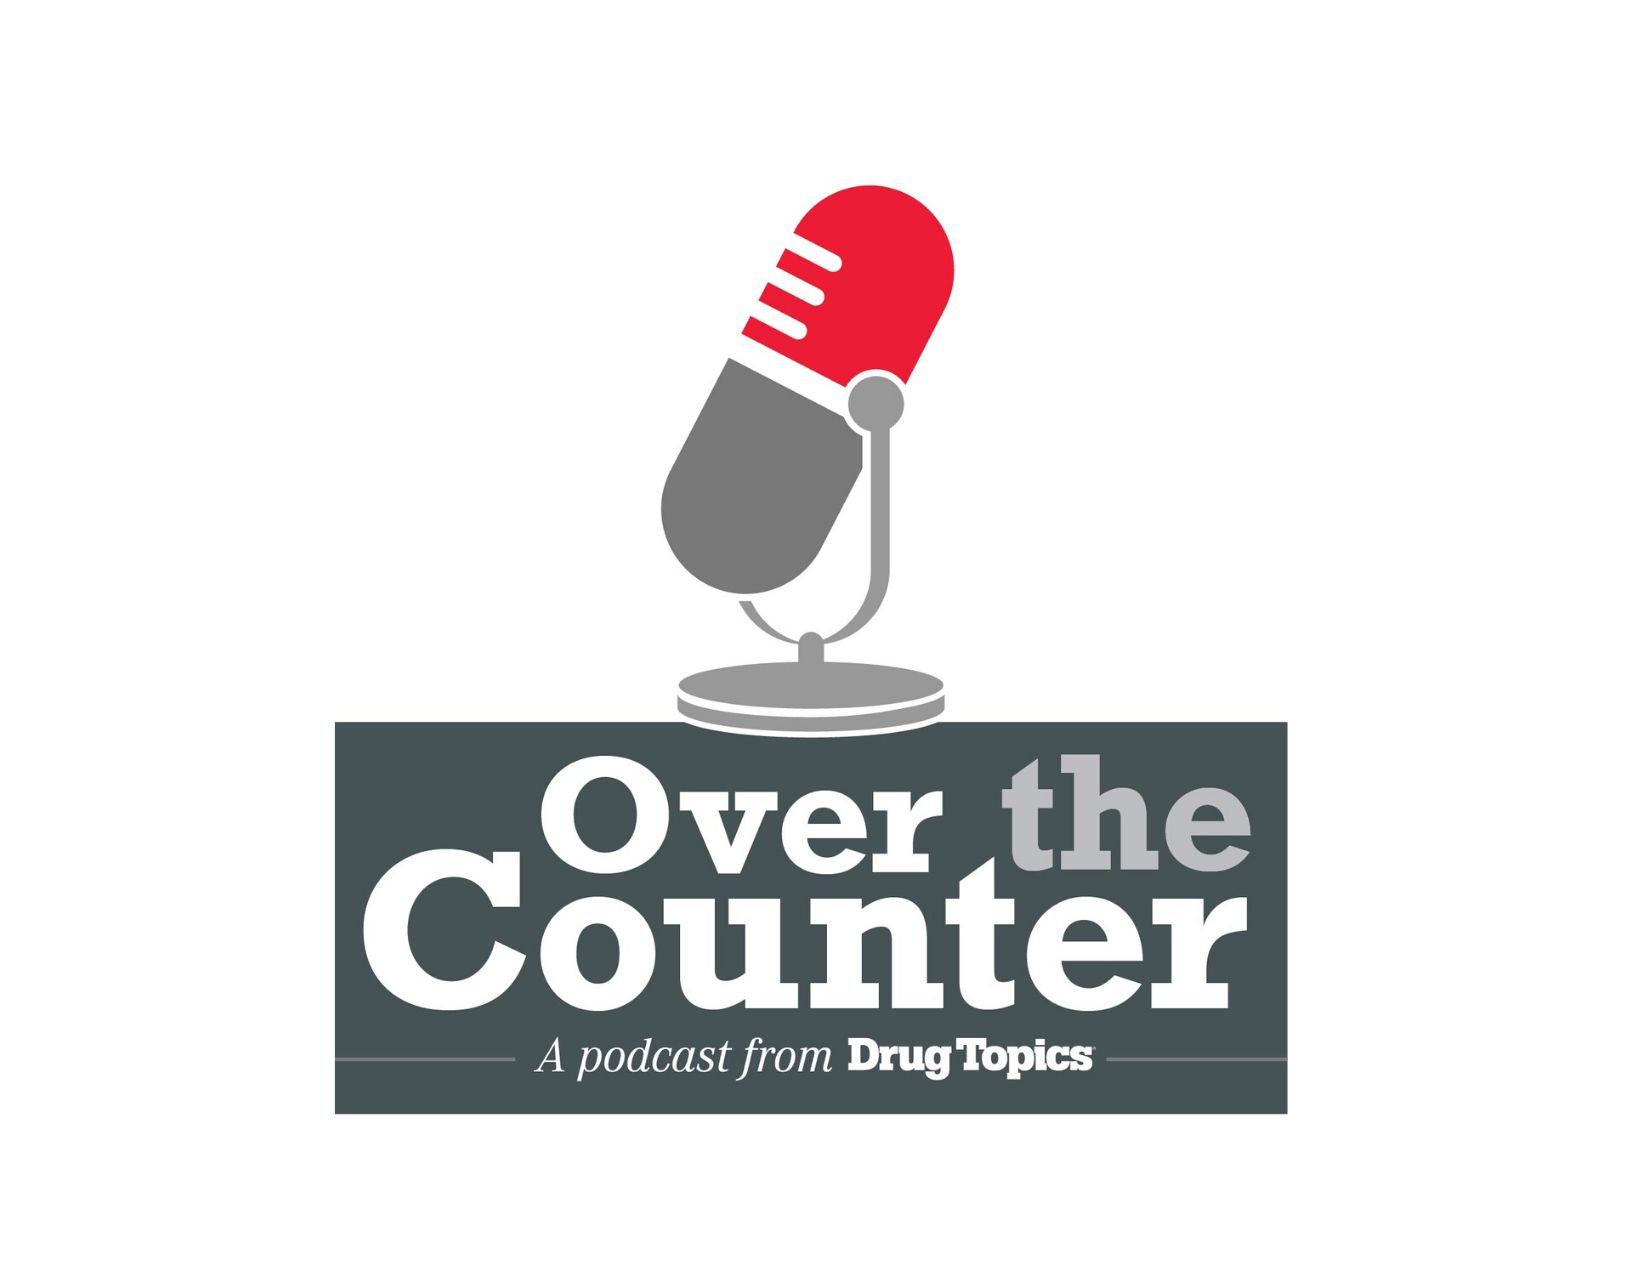 Over the Counter podcast